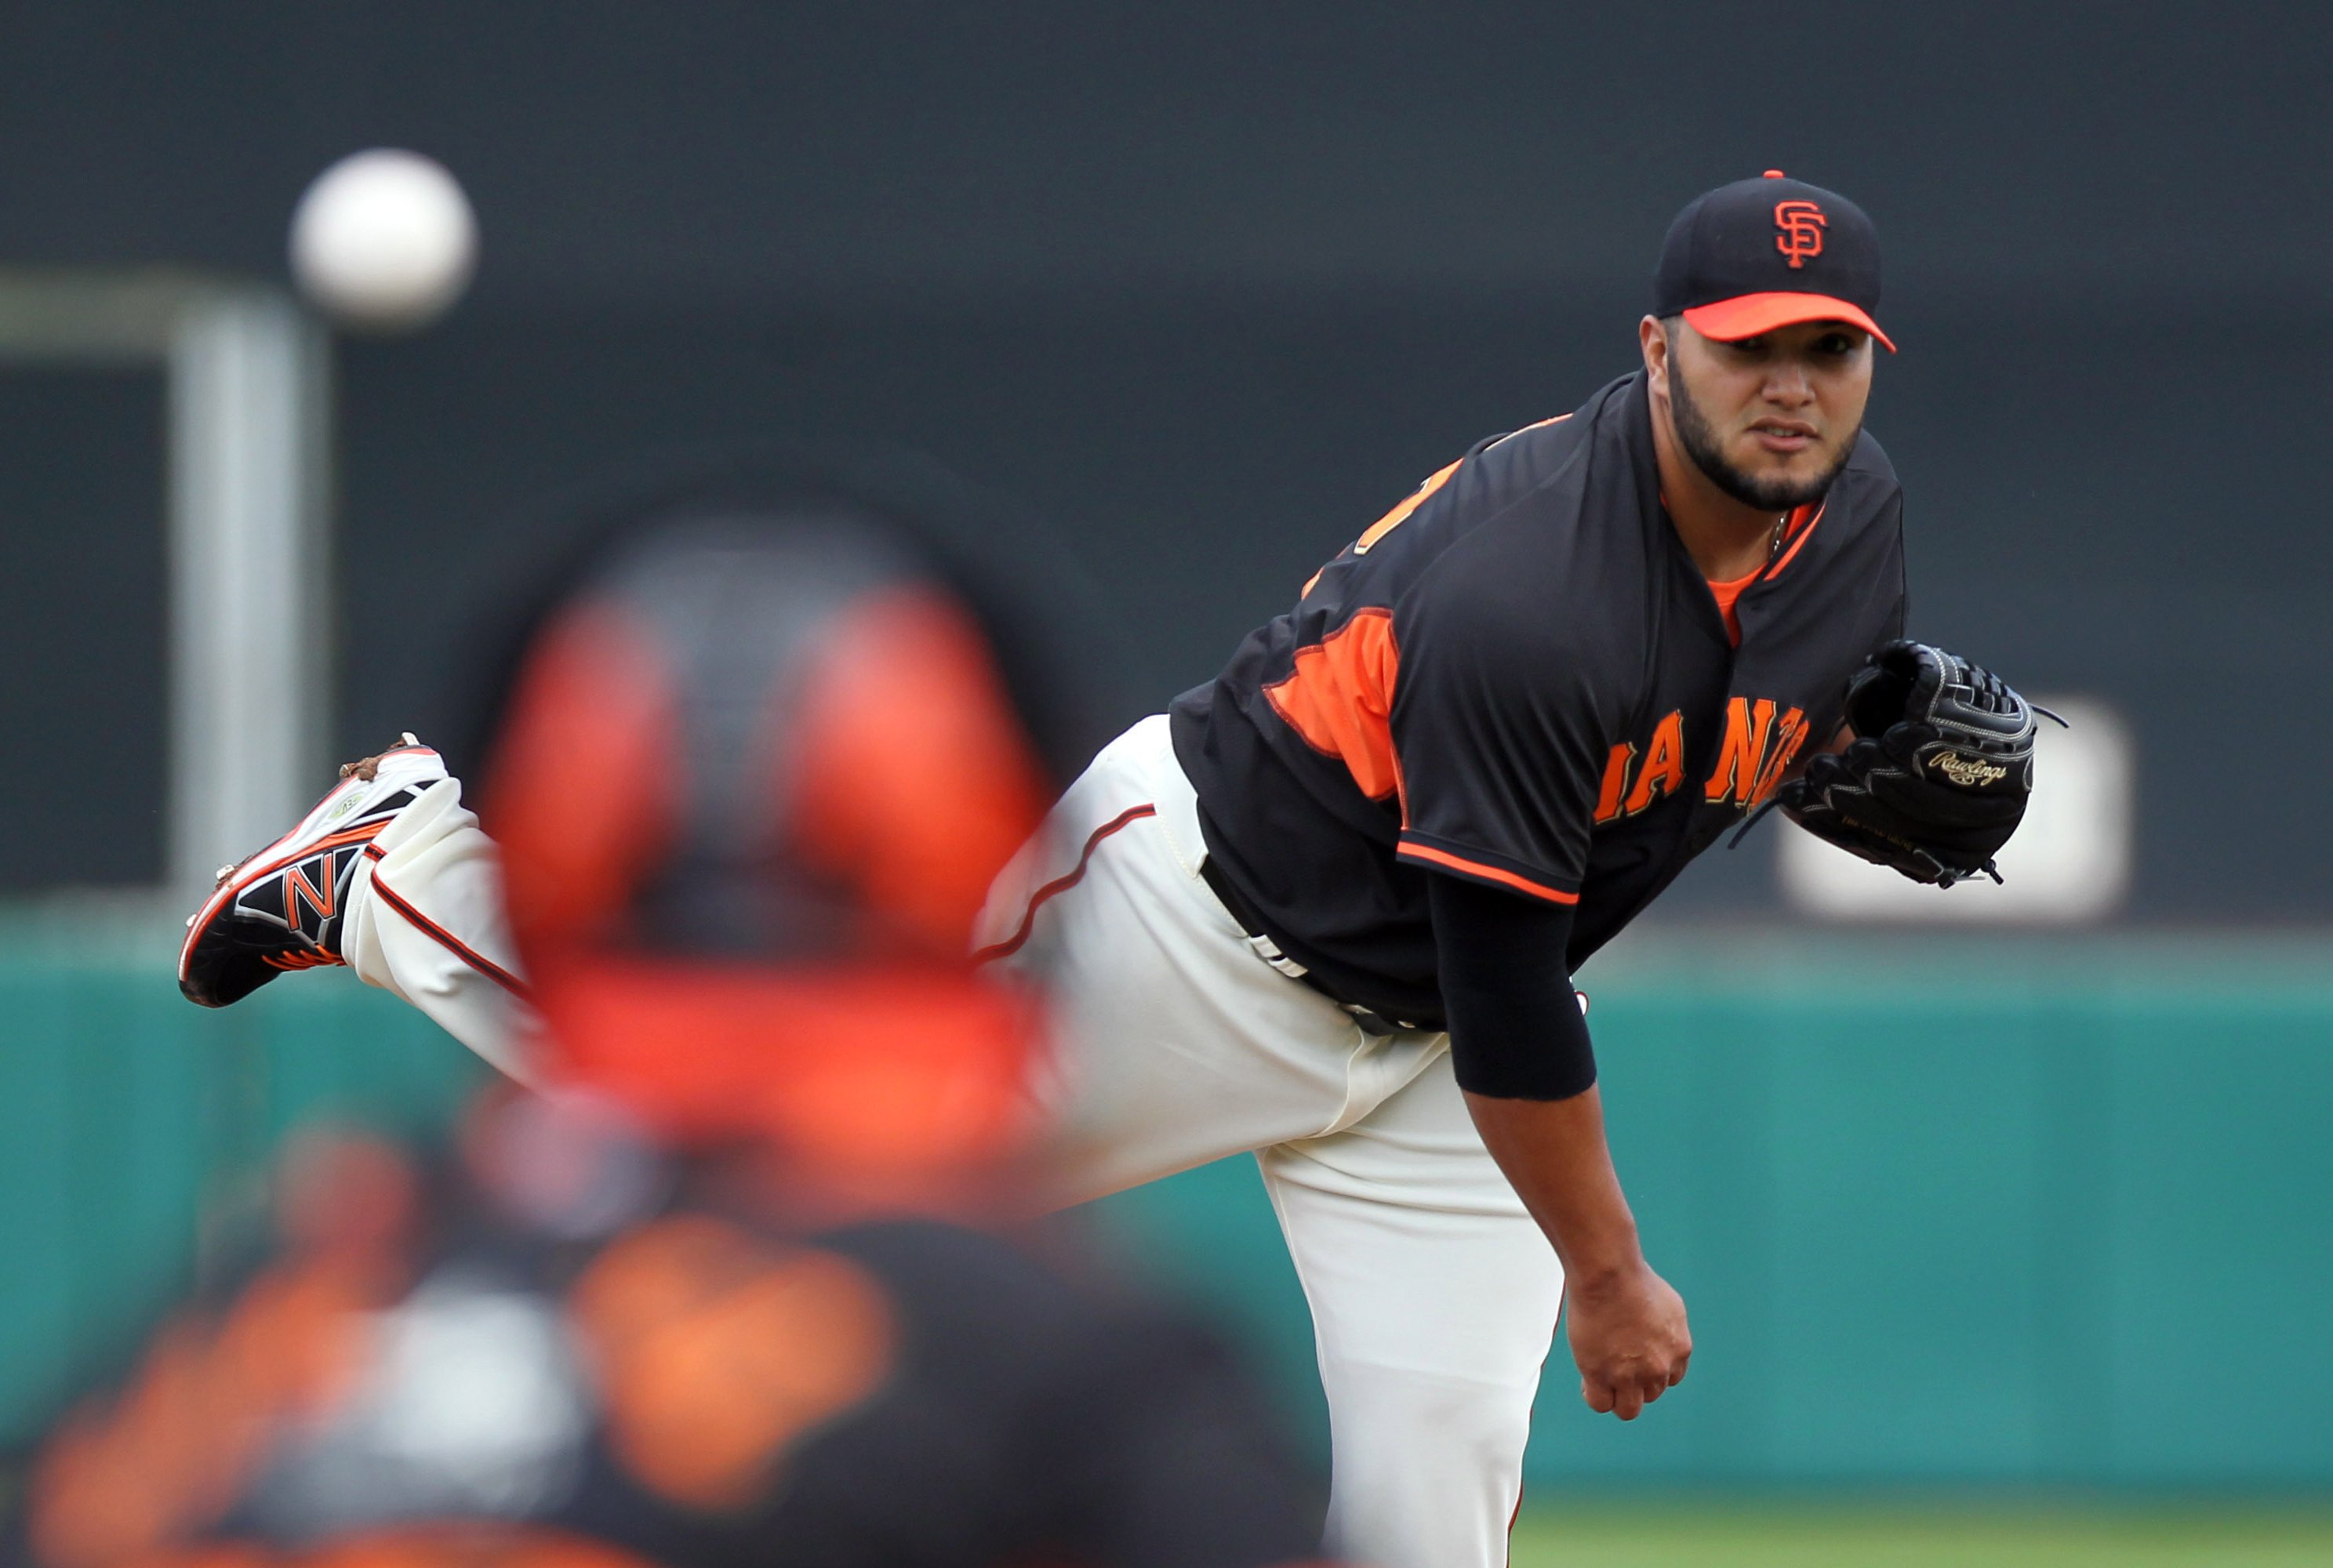 Sandoval pitches the ninth and Law scores a run in Giants blowout